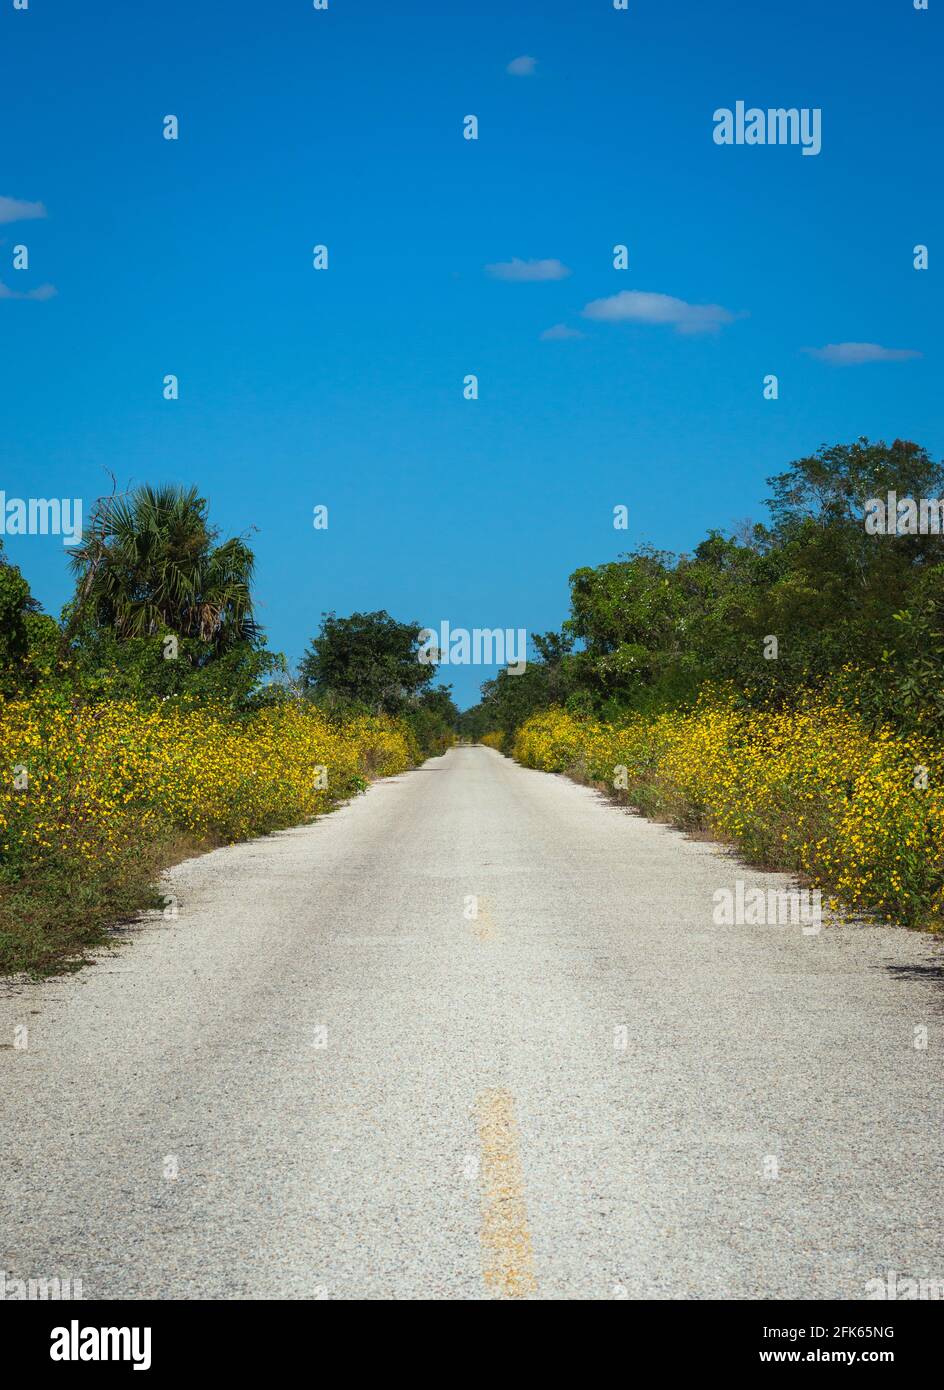 Yellow flowers on a road in Yucatan, Mexico Stock Photo